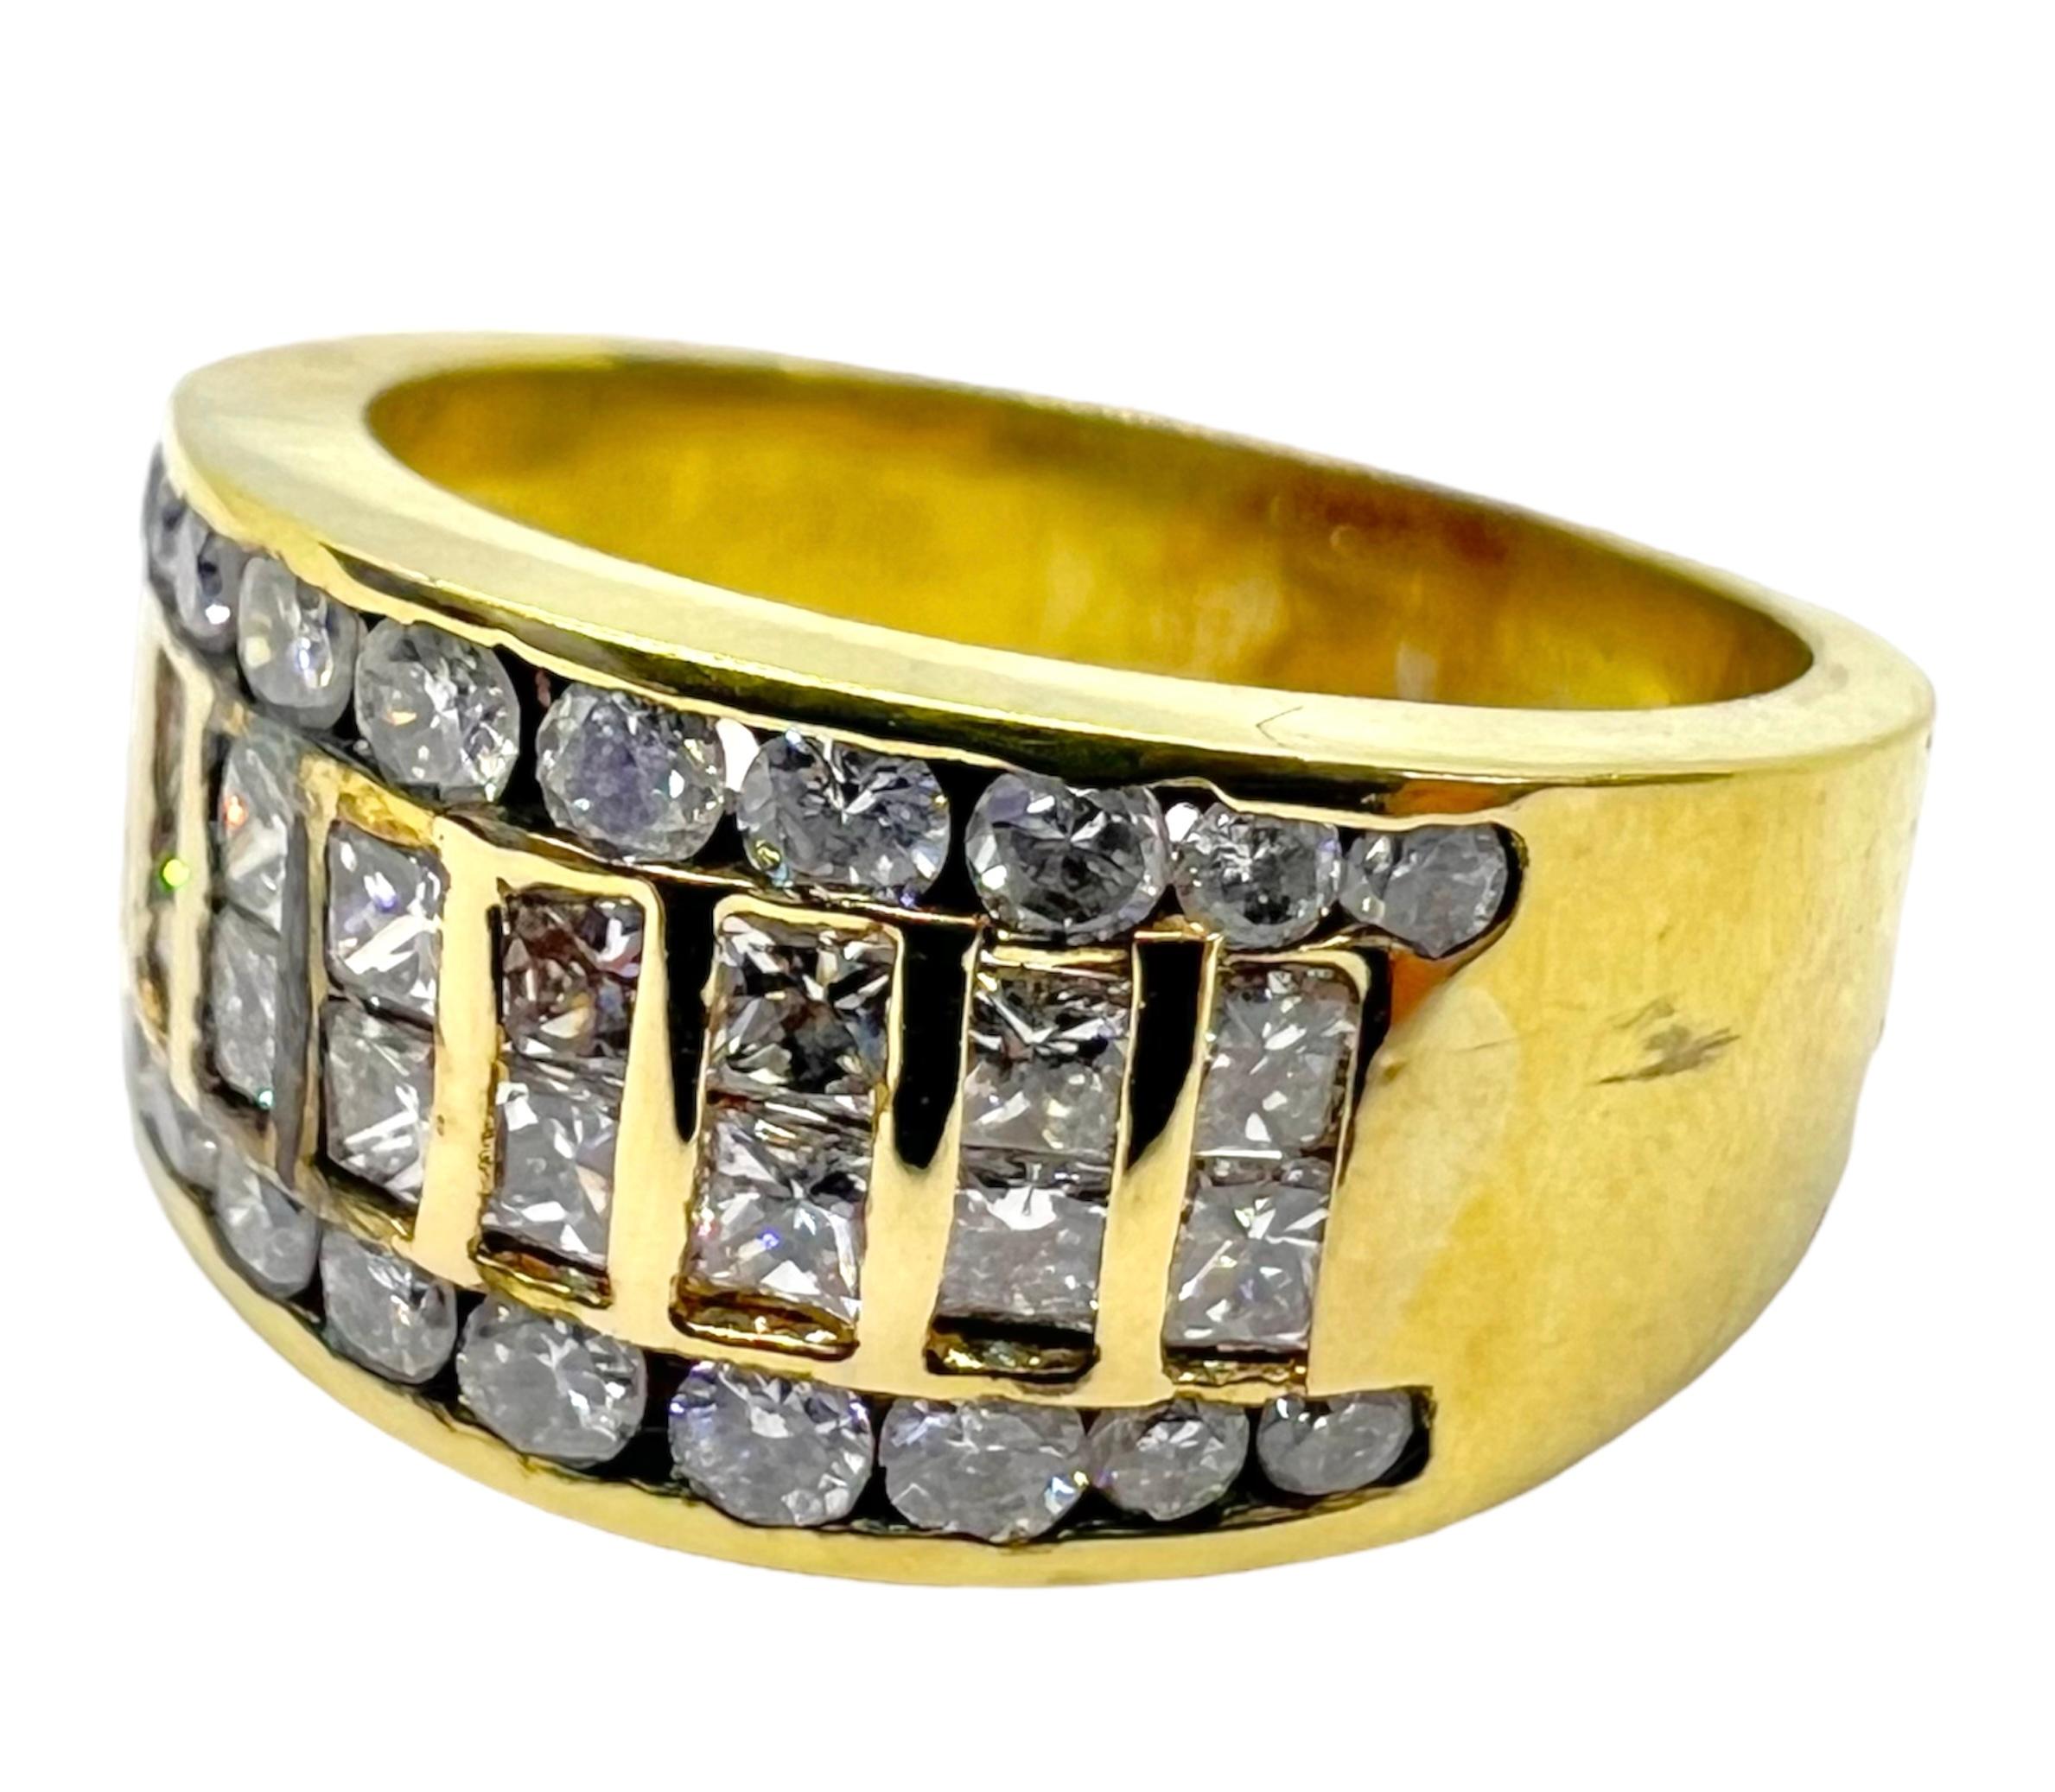 14K yellow gold ring with square cut and round diamonds.

Sophia D by Joseph Dardashti LTD has been known worldwide for 35 years and are inspired by classic Art Deco design that merges with modern manufacturing techniques.  